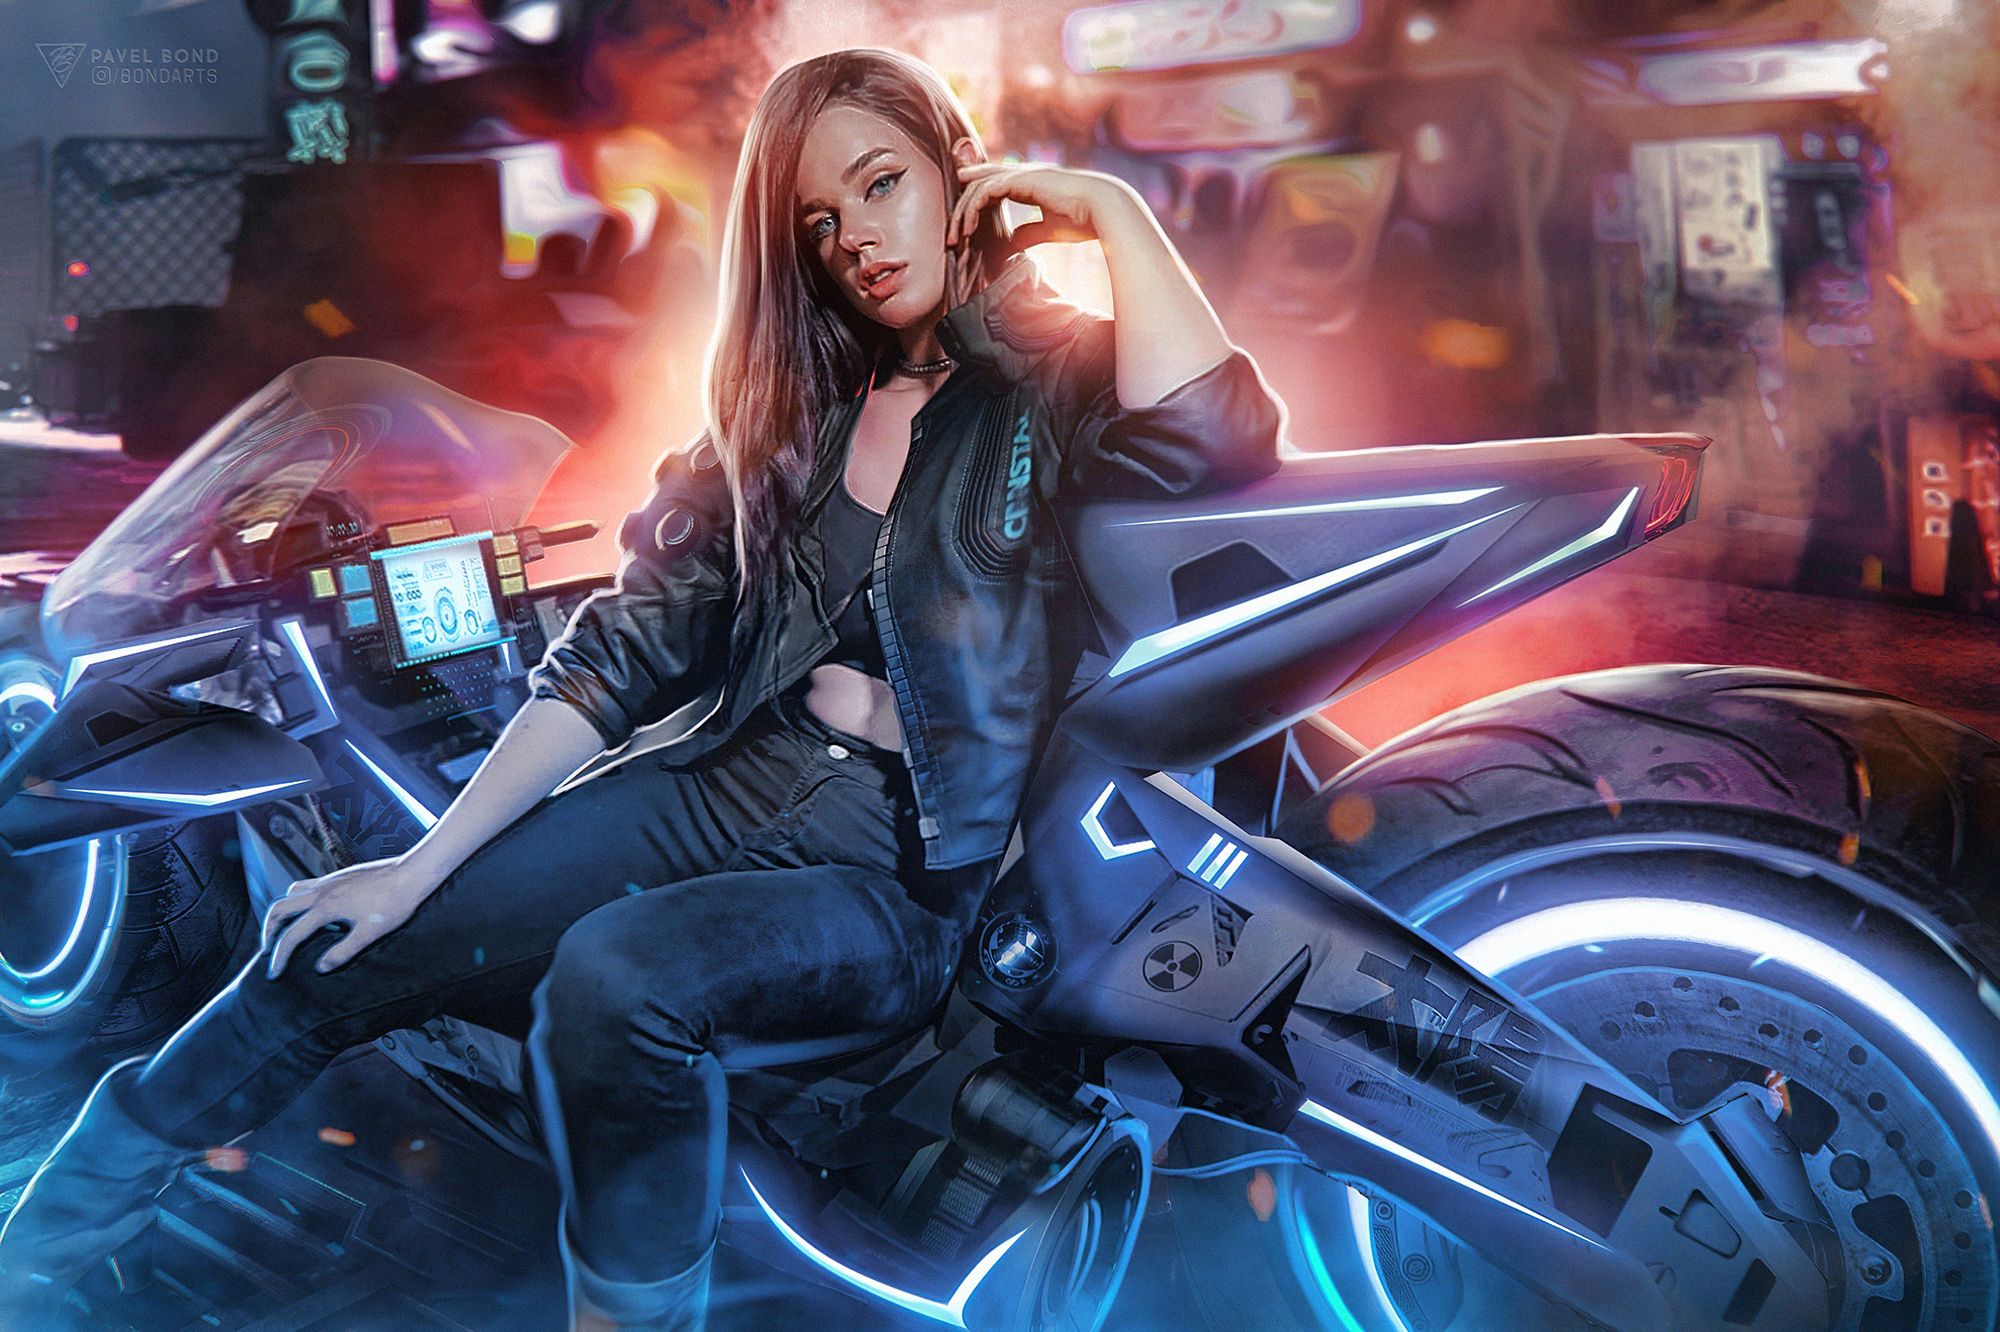 Cyberpunk Girl Futuristic Motorcycle Wallpapers Wallpaper Cave 4216